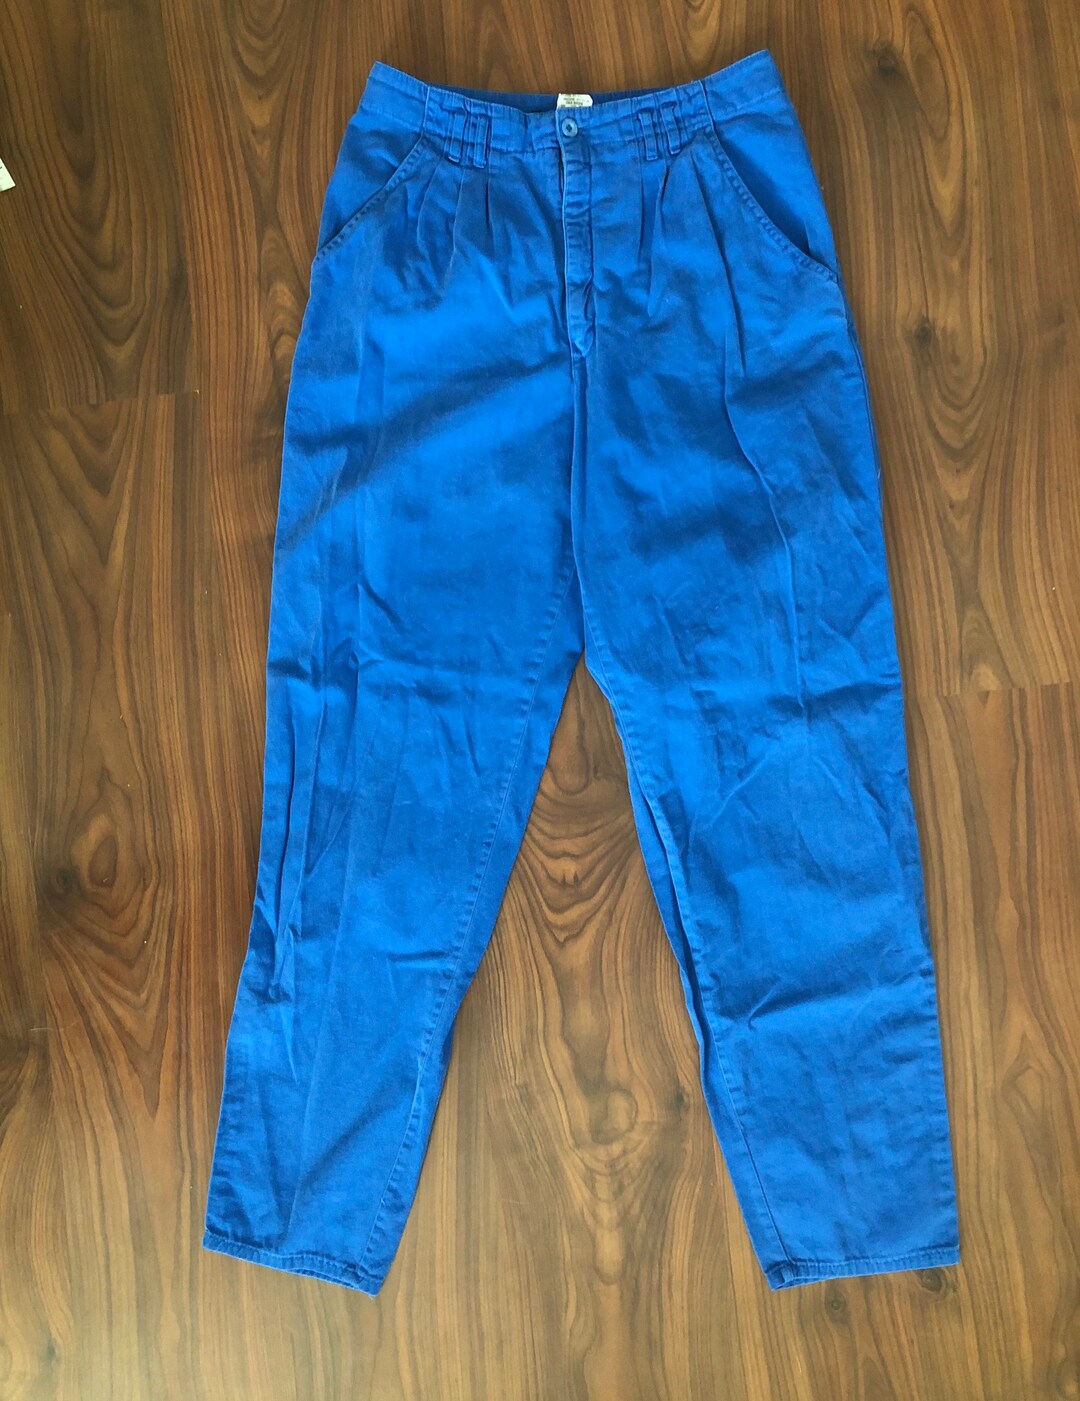 Vintage 90s High Waist Pleated Blue Pants by Esprit Rose Hips - Etsy